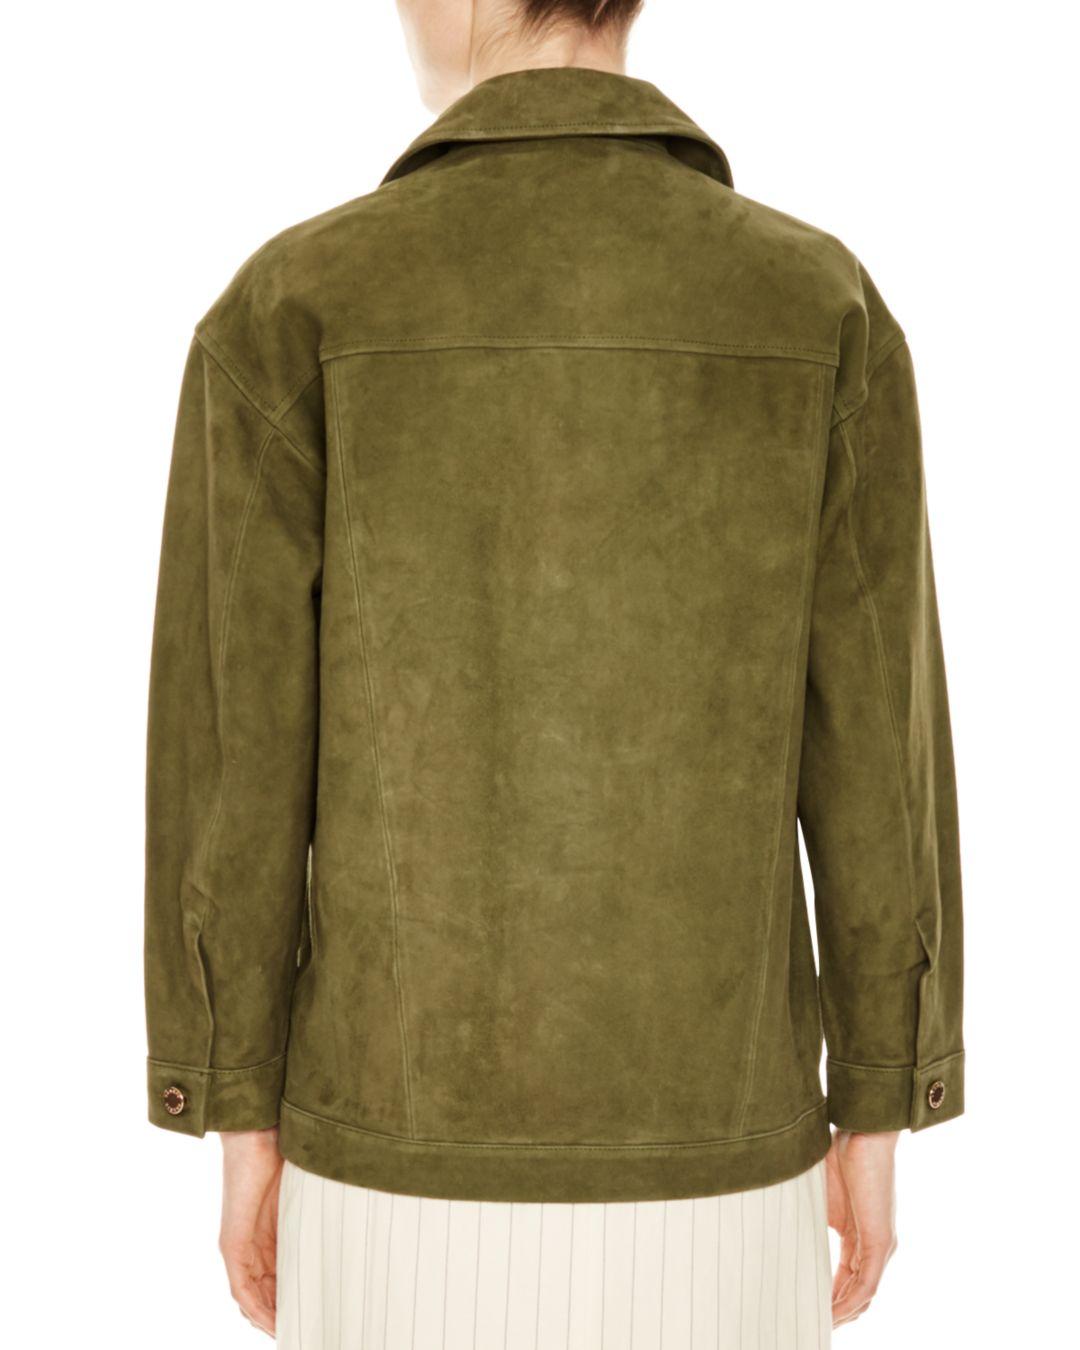 Sandro Thom Suede Jacket in Olive Green (Green) - Lyst